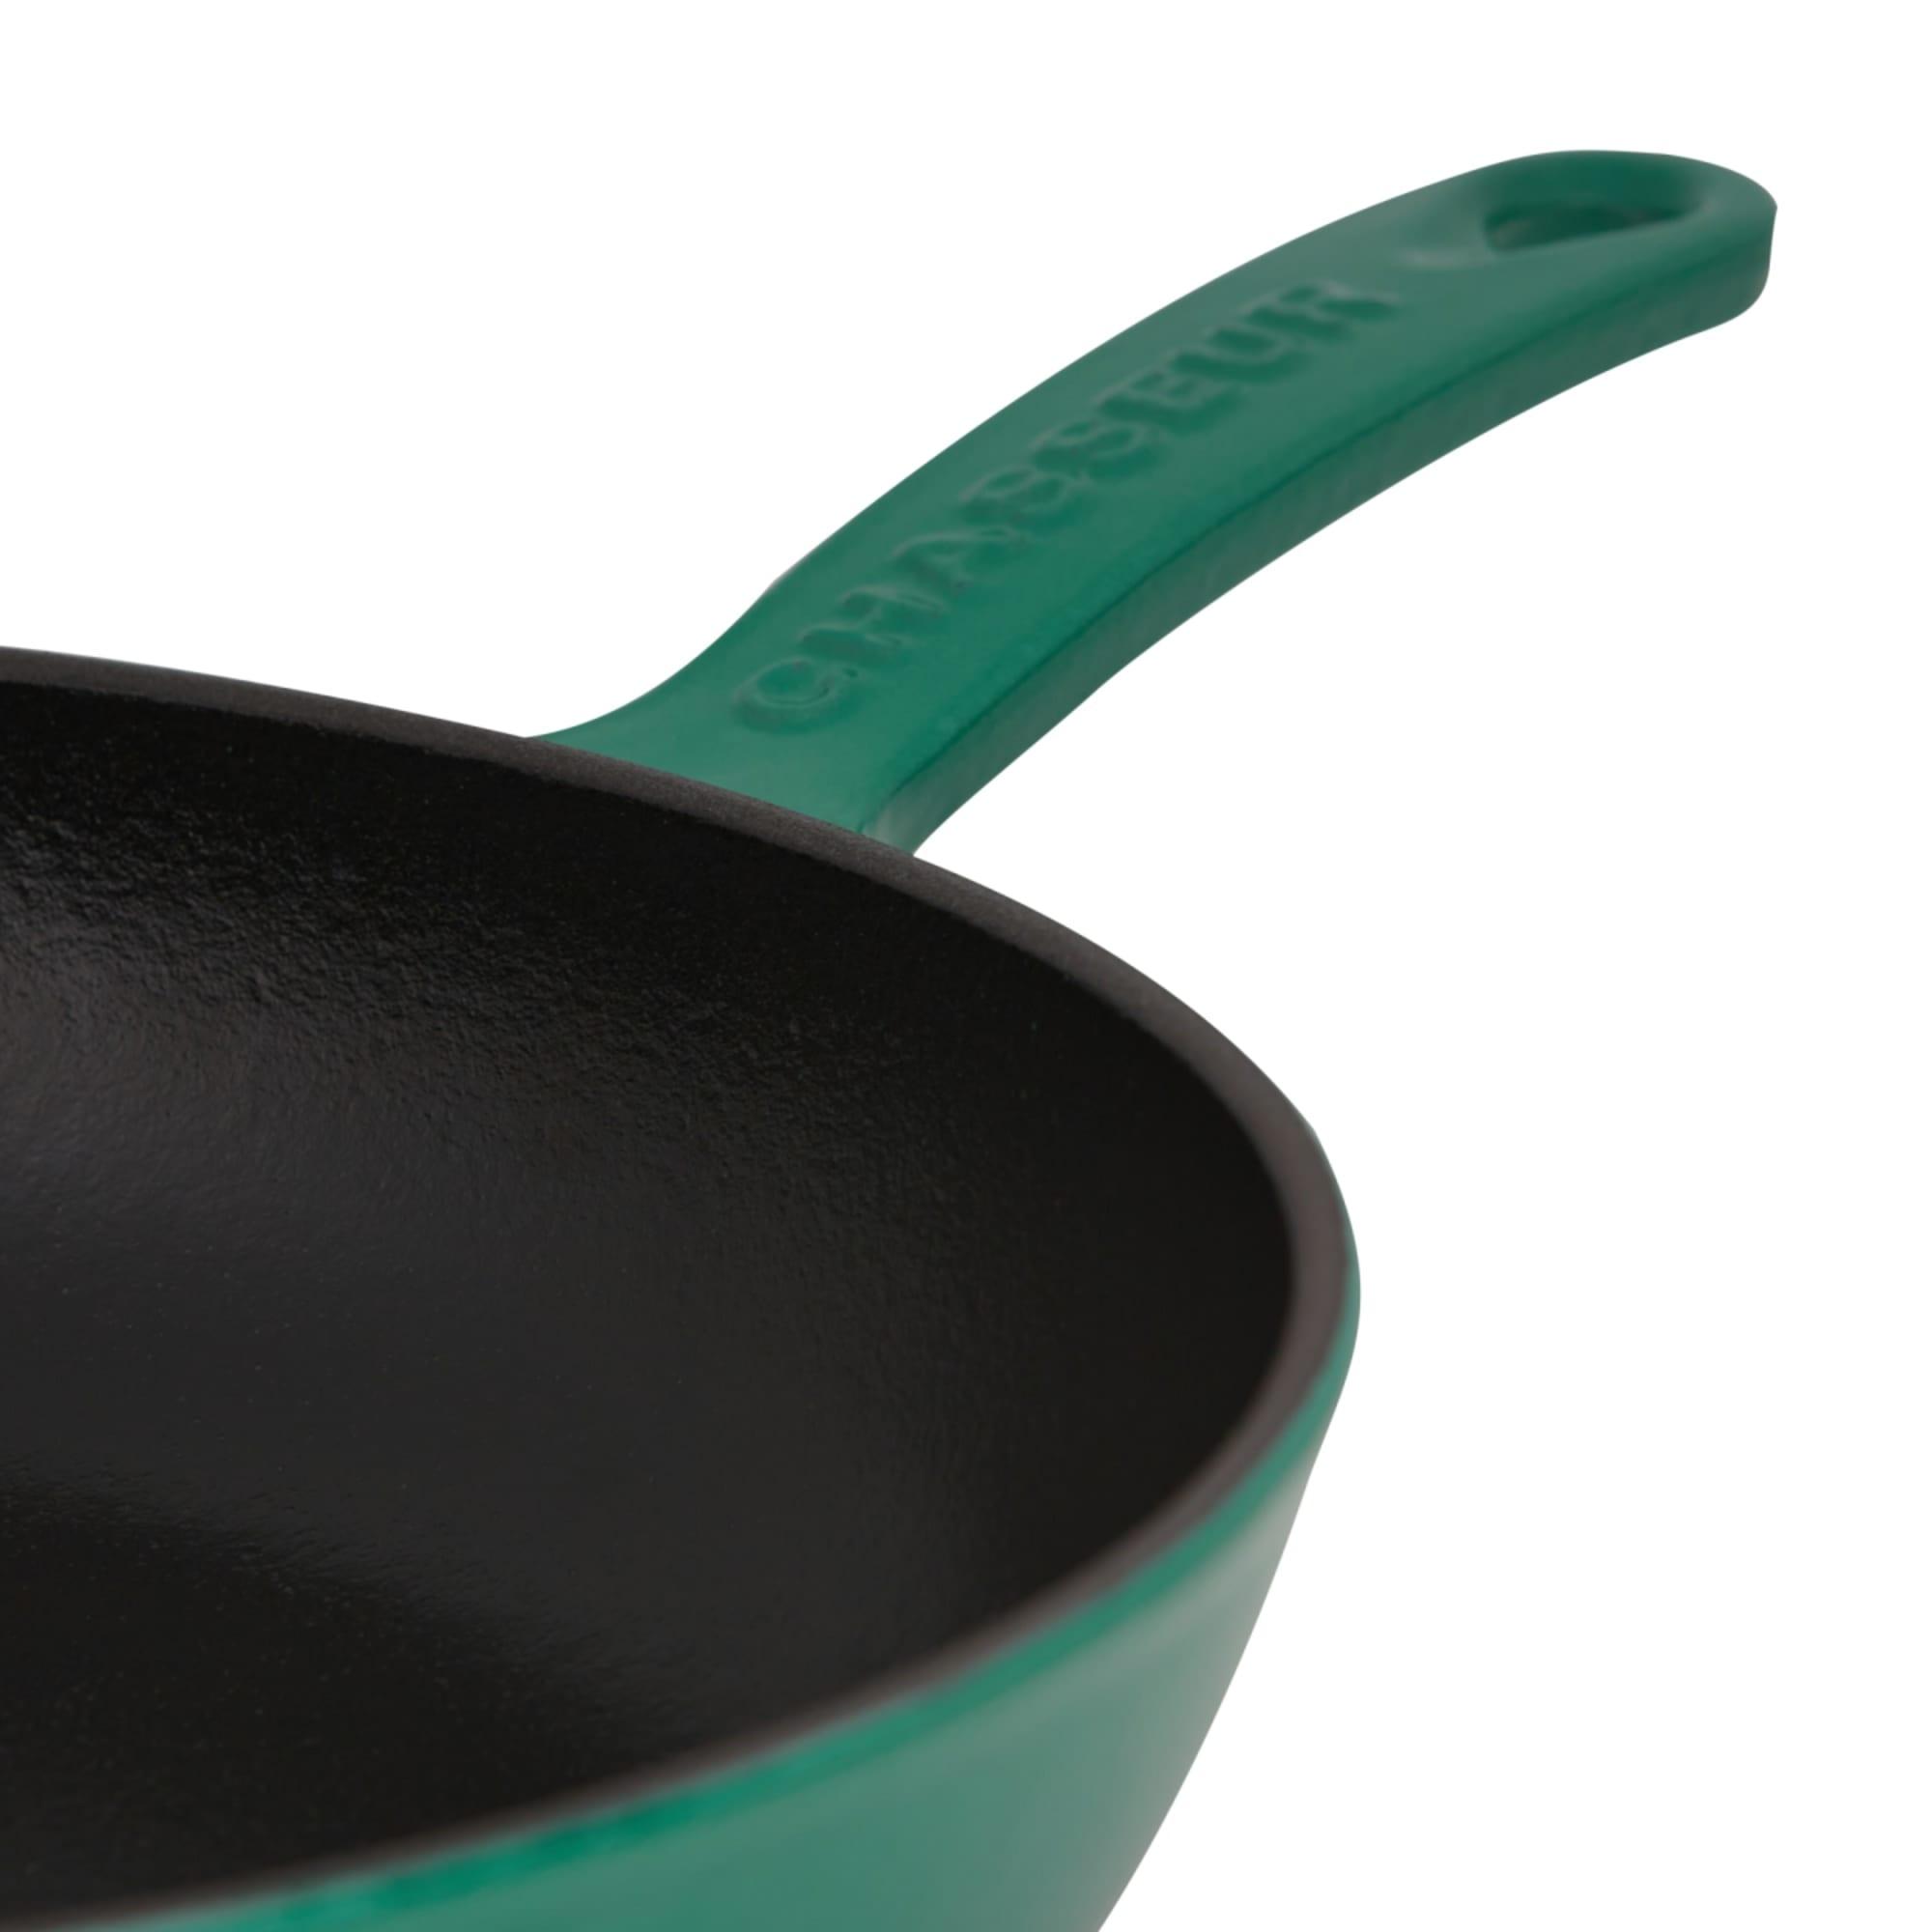 Chasseur Enamelled Cast Iron Frypan 28cm Emerald Green Image 5